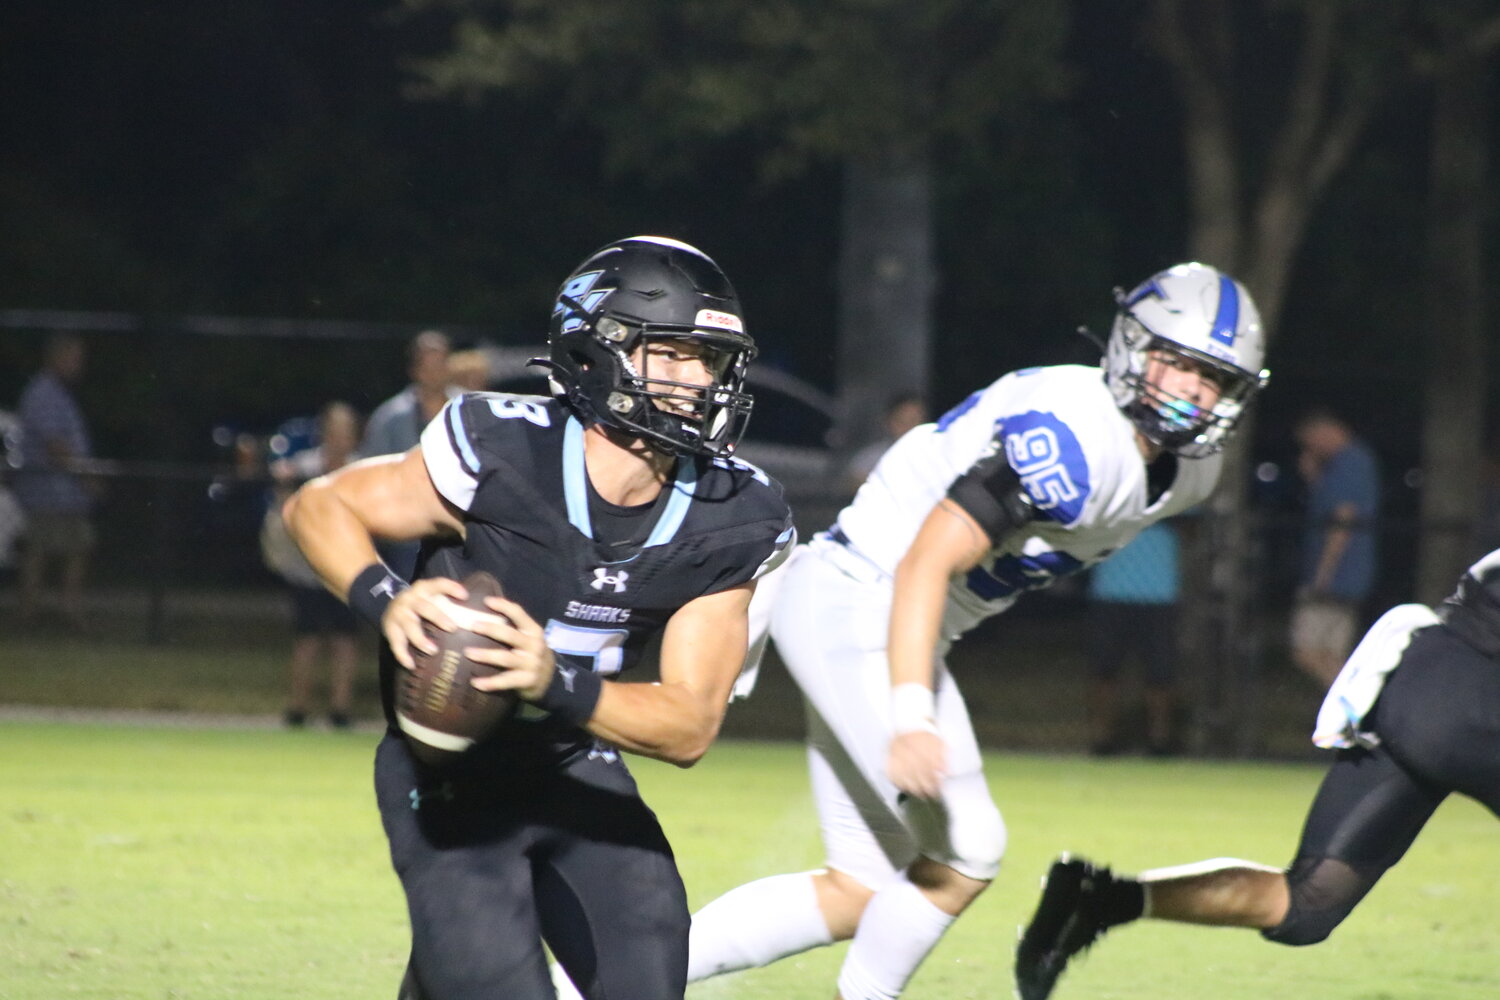 Ben Burk and the Ponte Vedra Sharks have their eyes focused on the start of district play this Friday night.